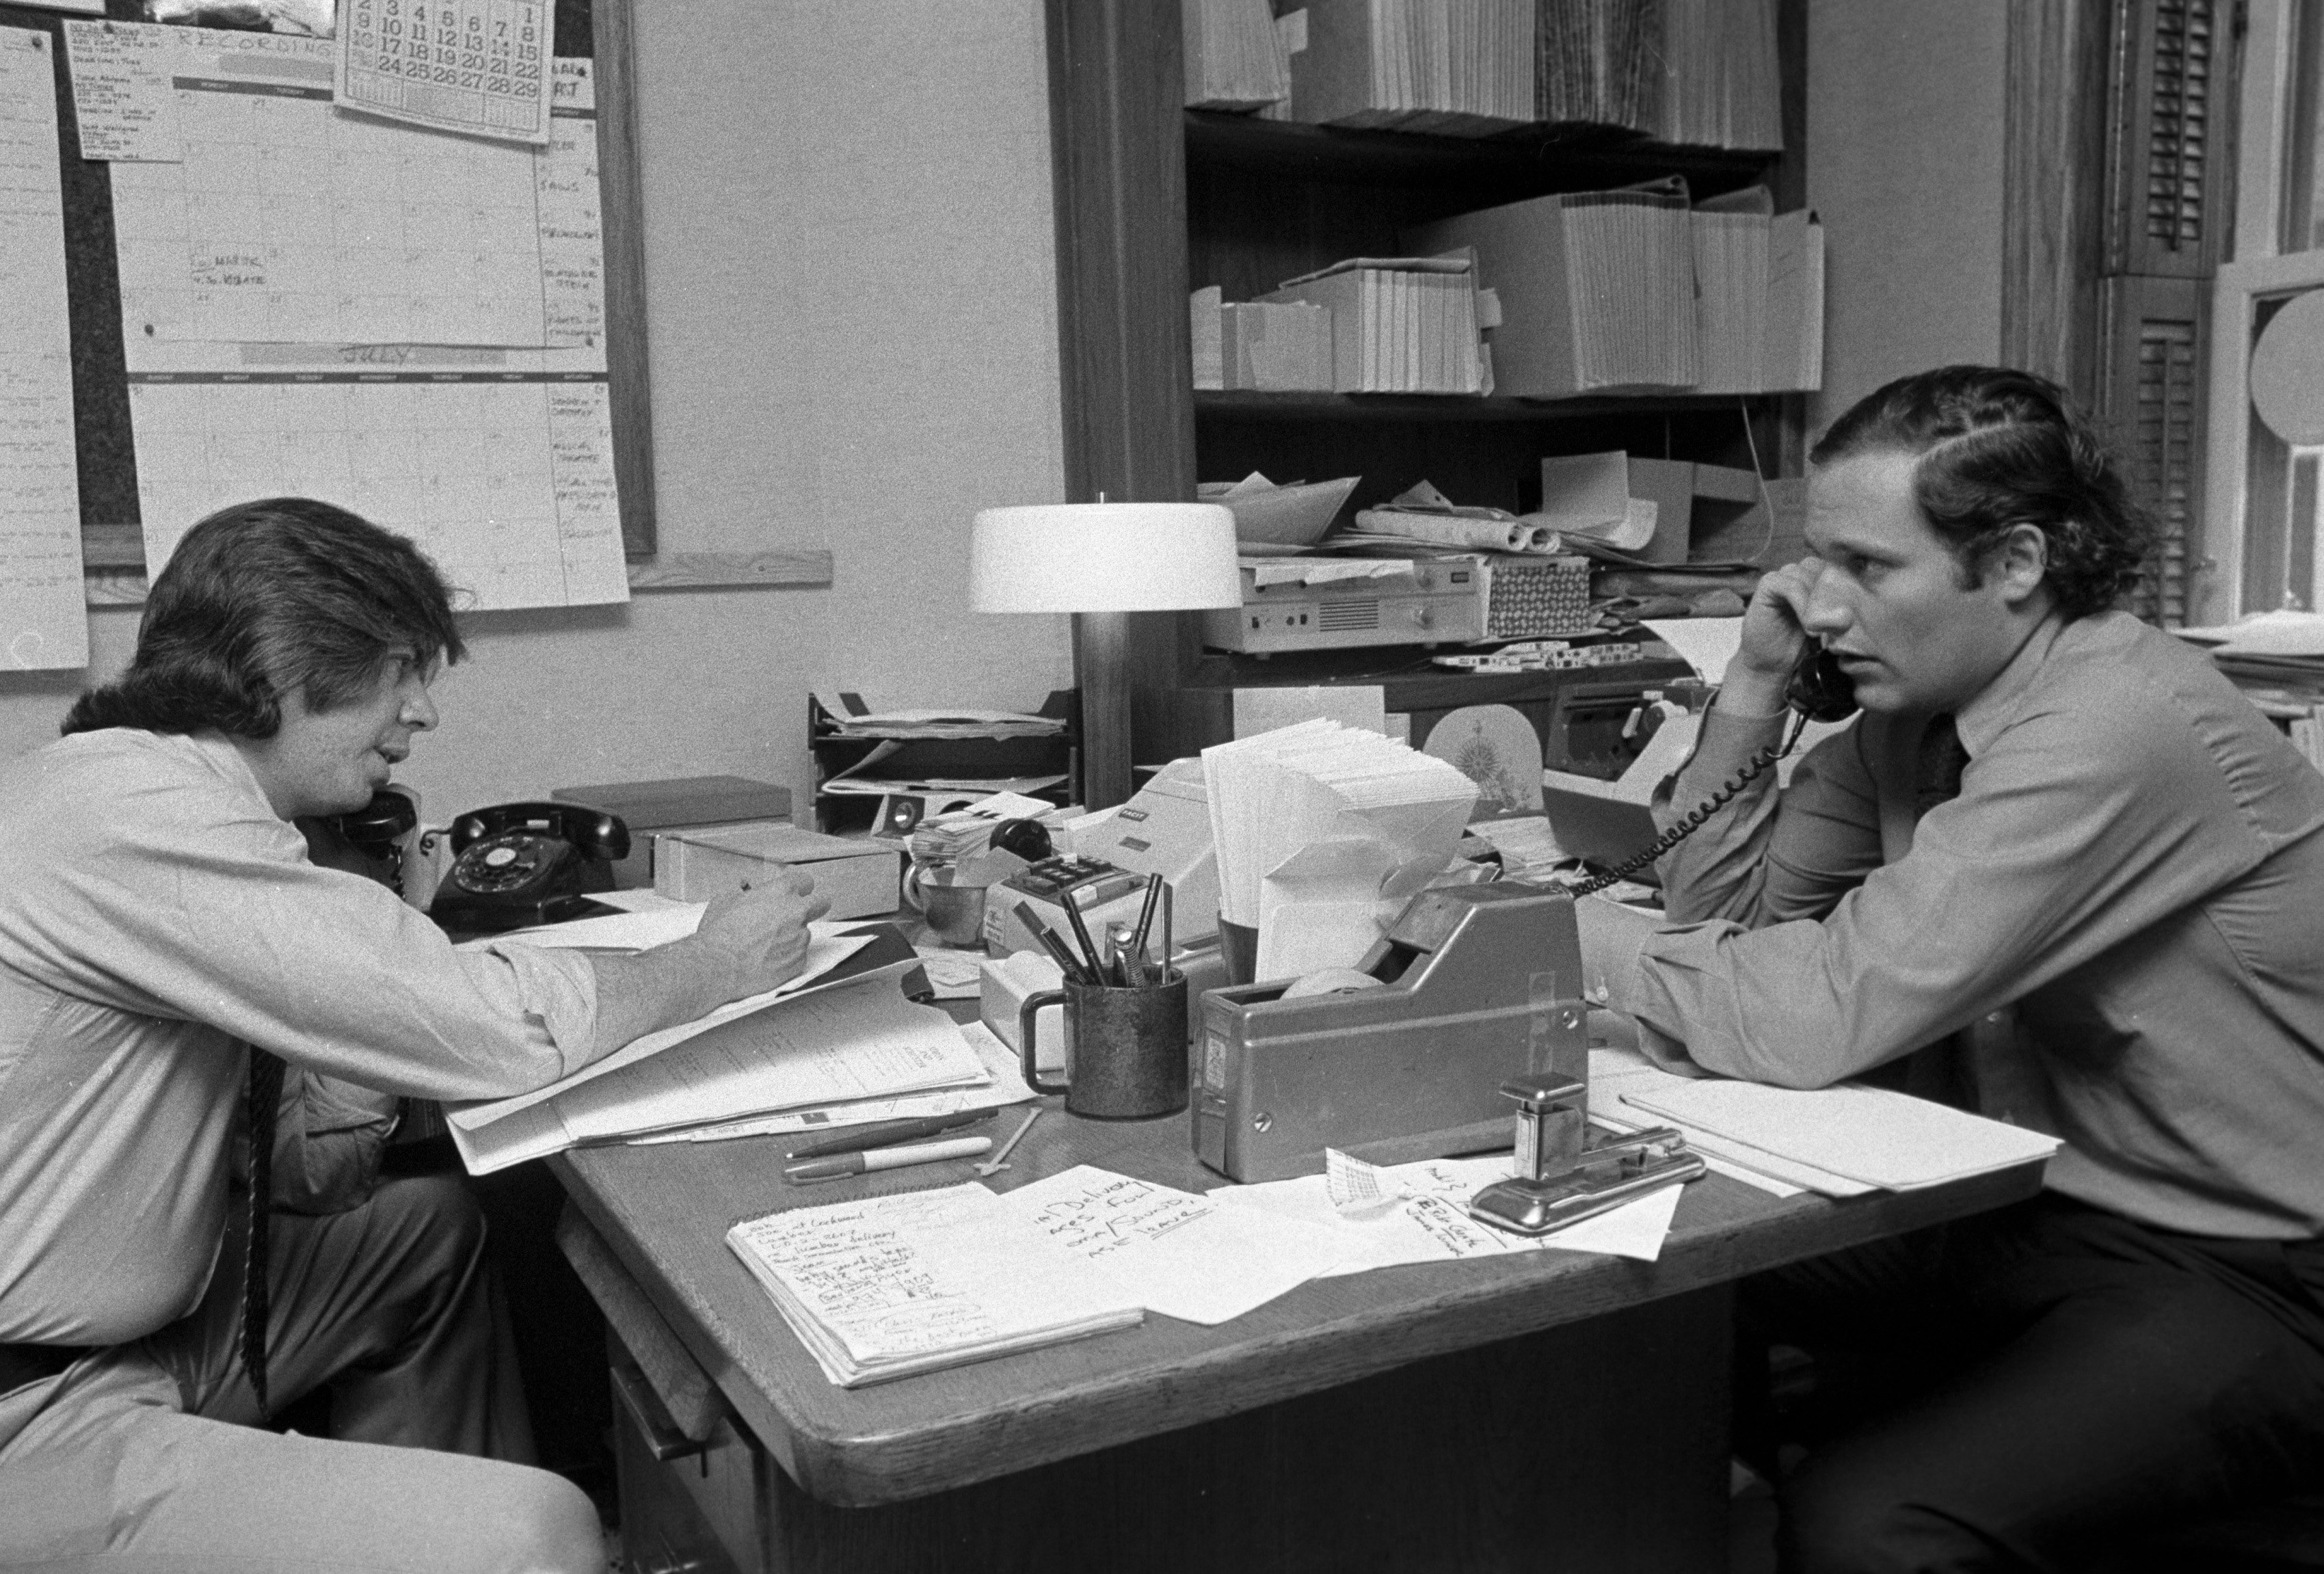 Journalists Carl Bernstein (L) and Bob Woodward (R), whose reporting on the Watergate incident won a Pulitzer Prize, making phone calls on June 17, 1974 in New York City. (Waring Abbott—Getty Images)